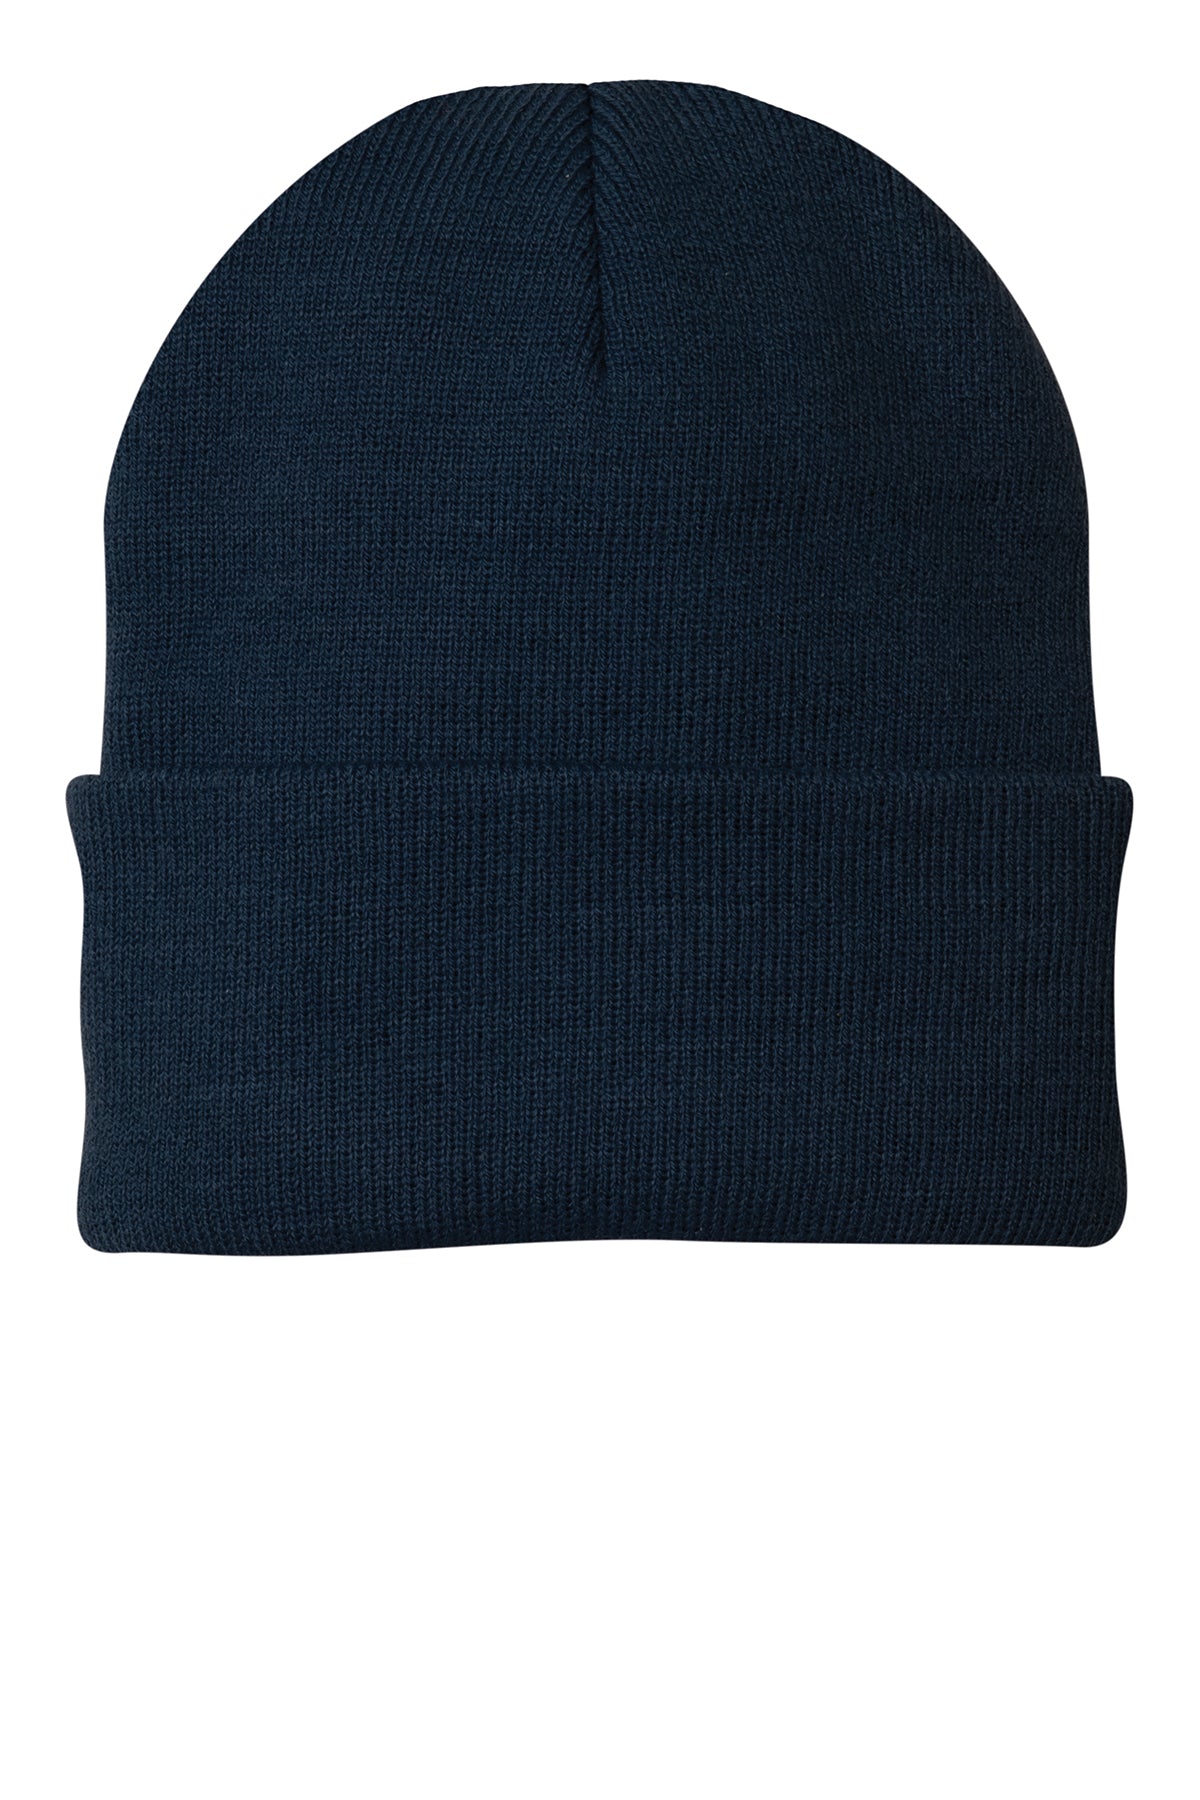 Knit Cap with Folded Cuff - Add Your Full Color Vinyl Logo At No Additional Cost